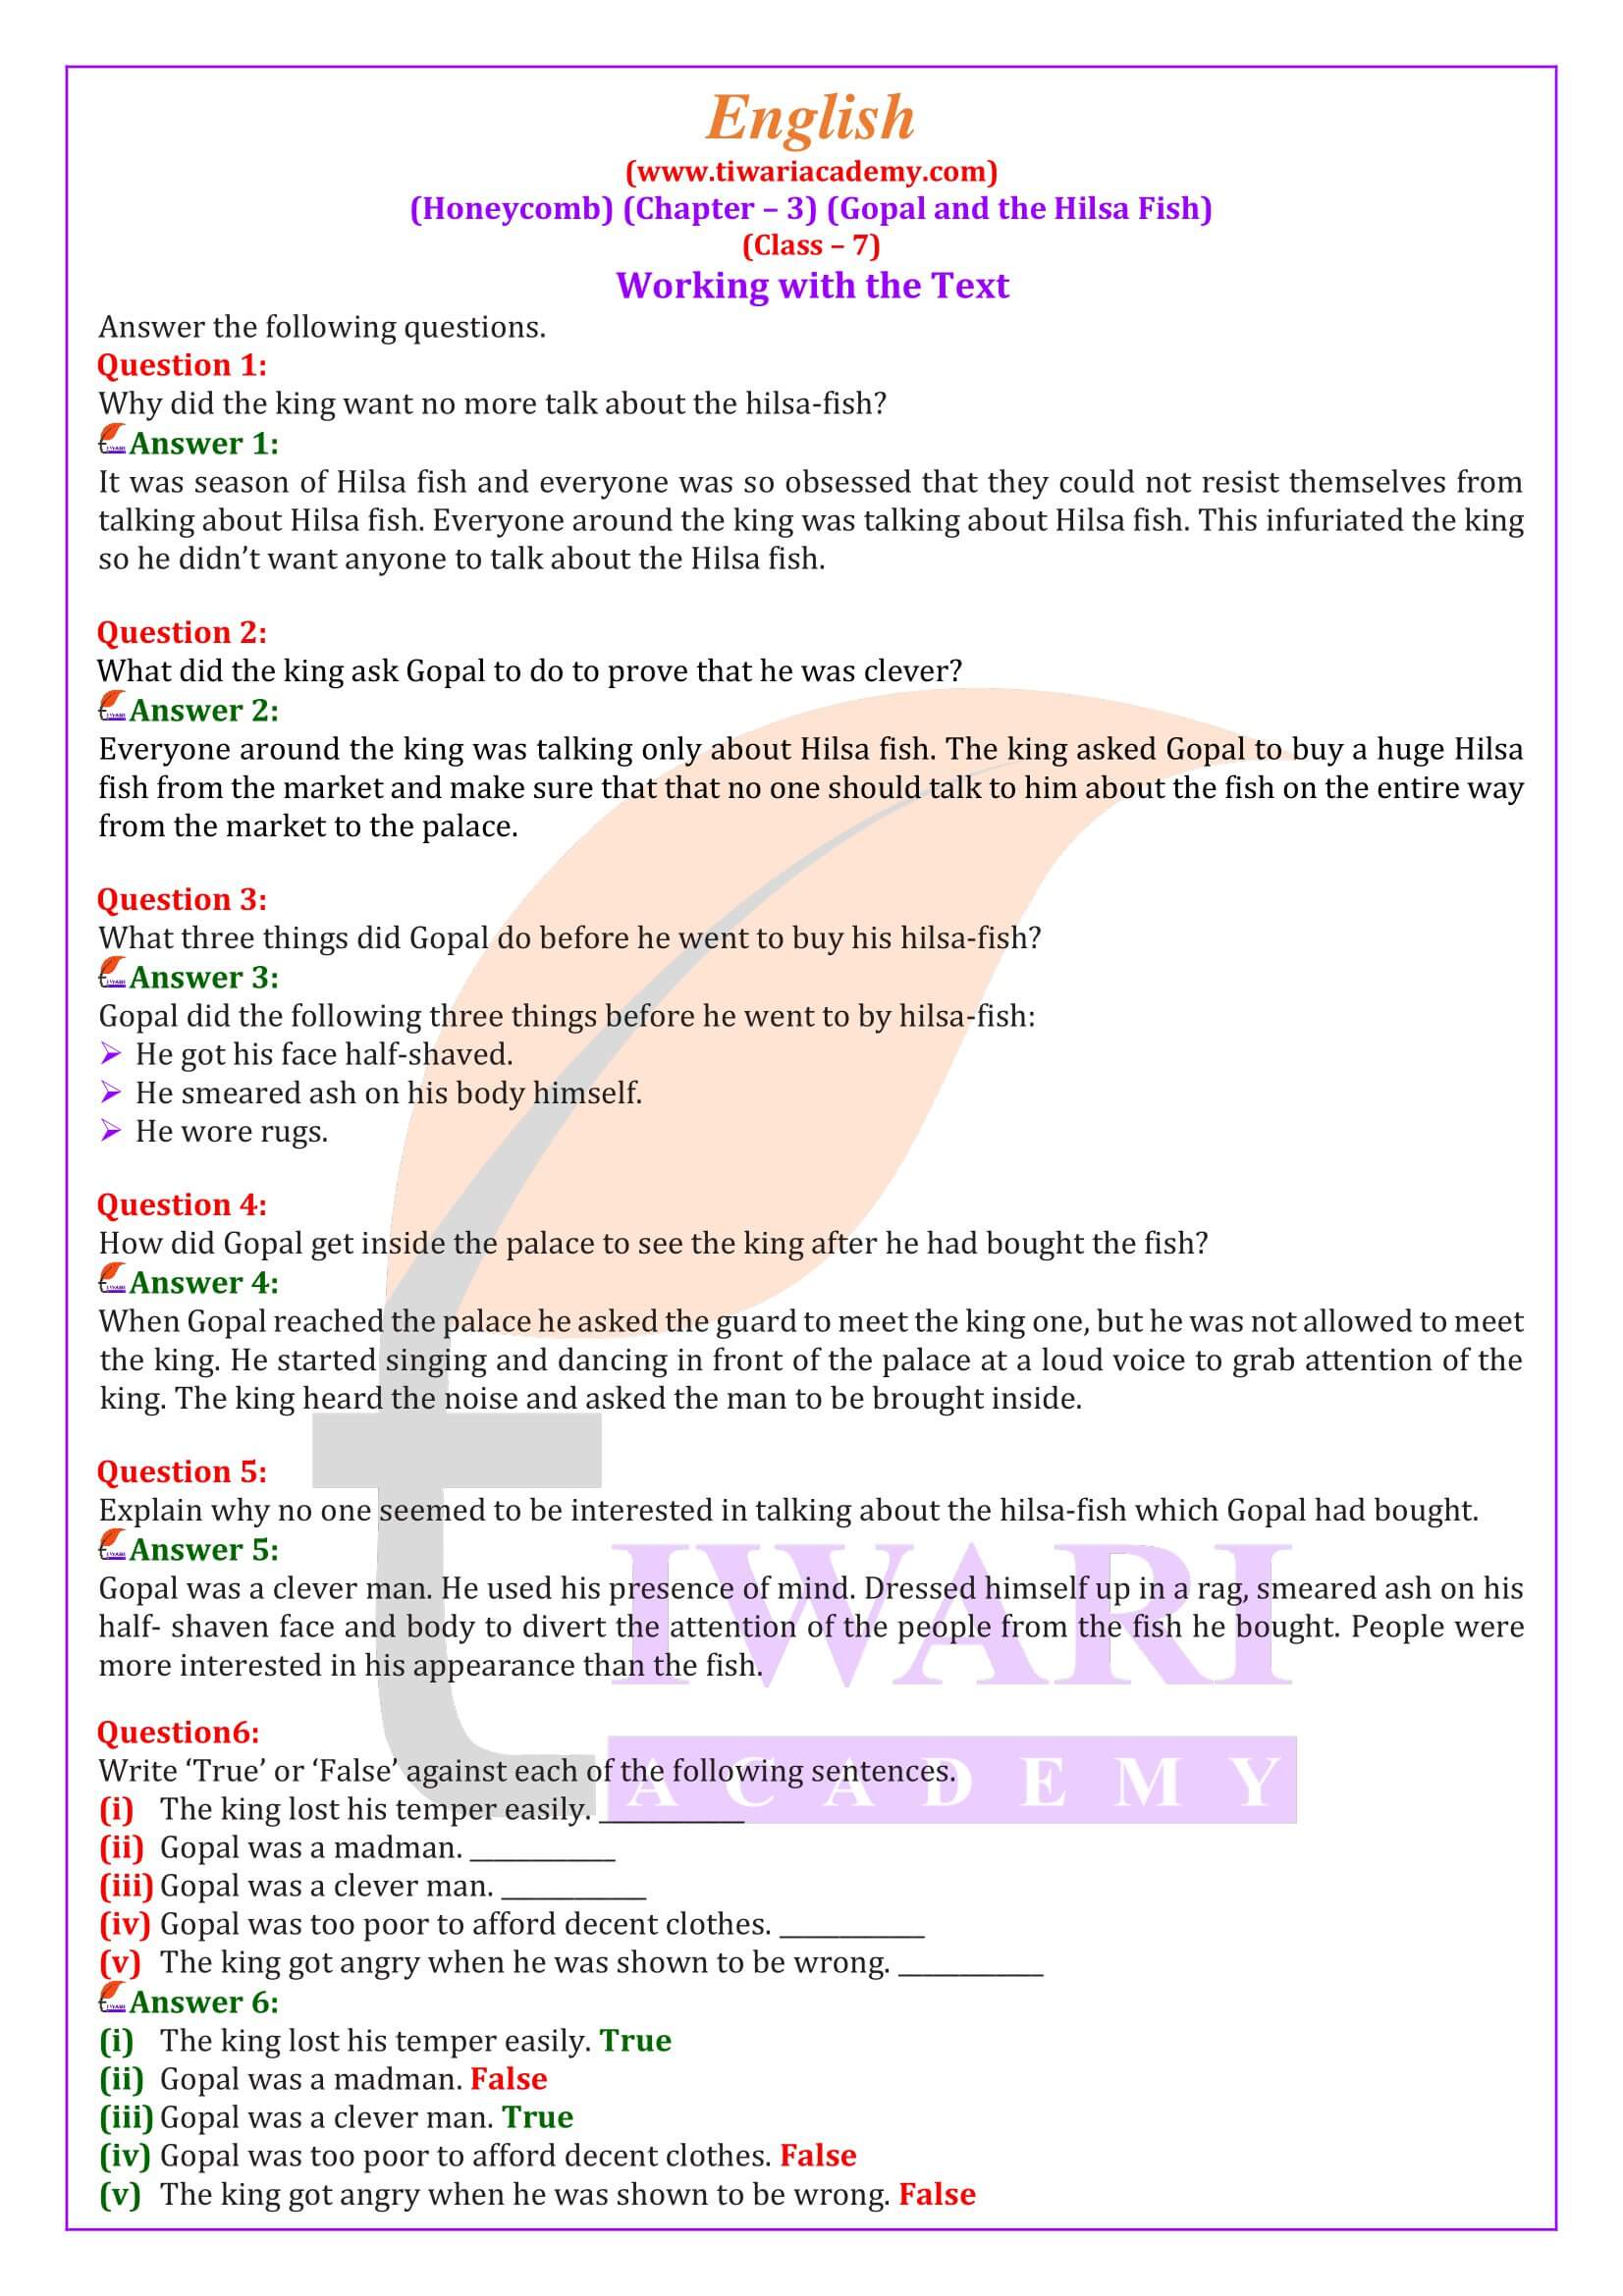 NCERT Solutions for Class 7 English Honeycomb Chapter 3 Gopal and the Hilsa Fish